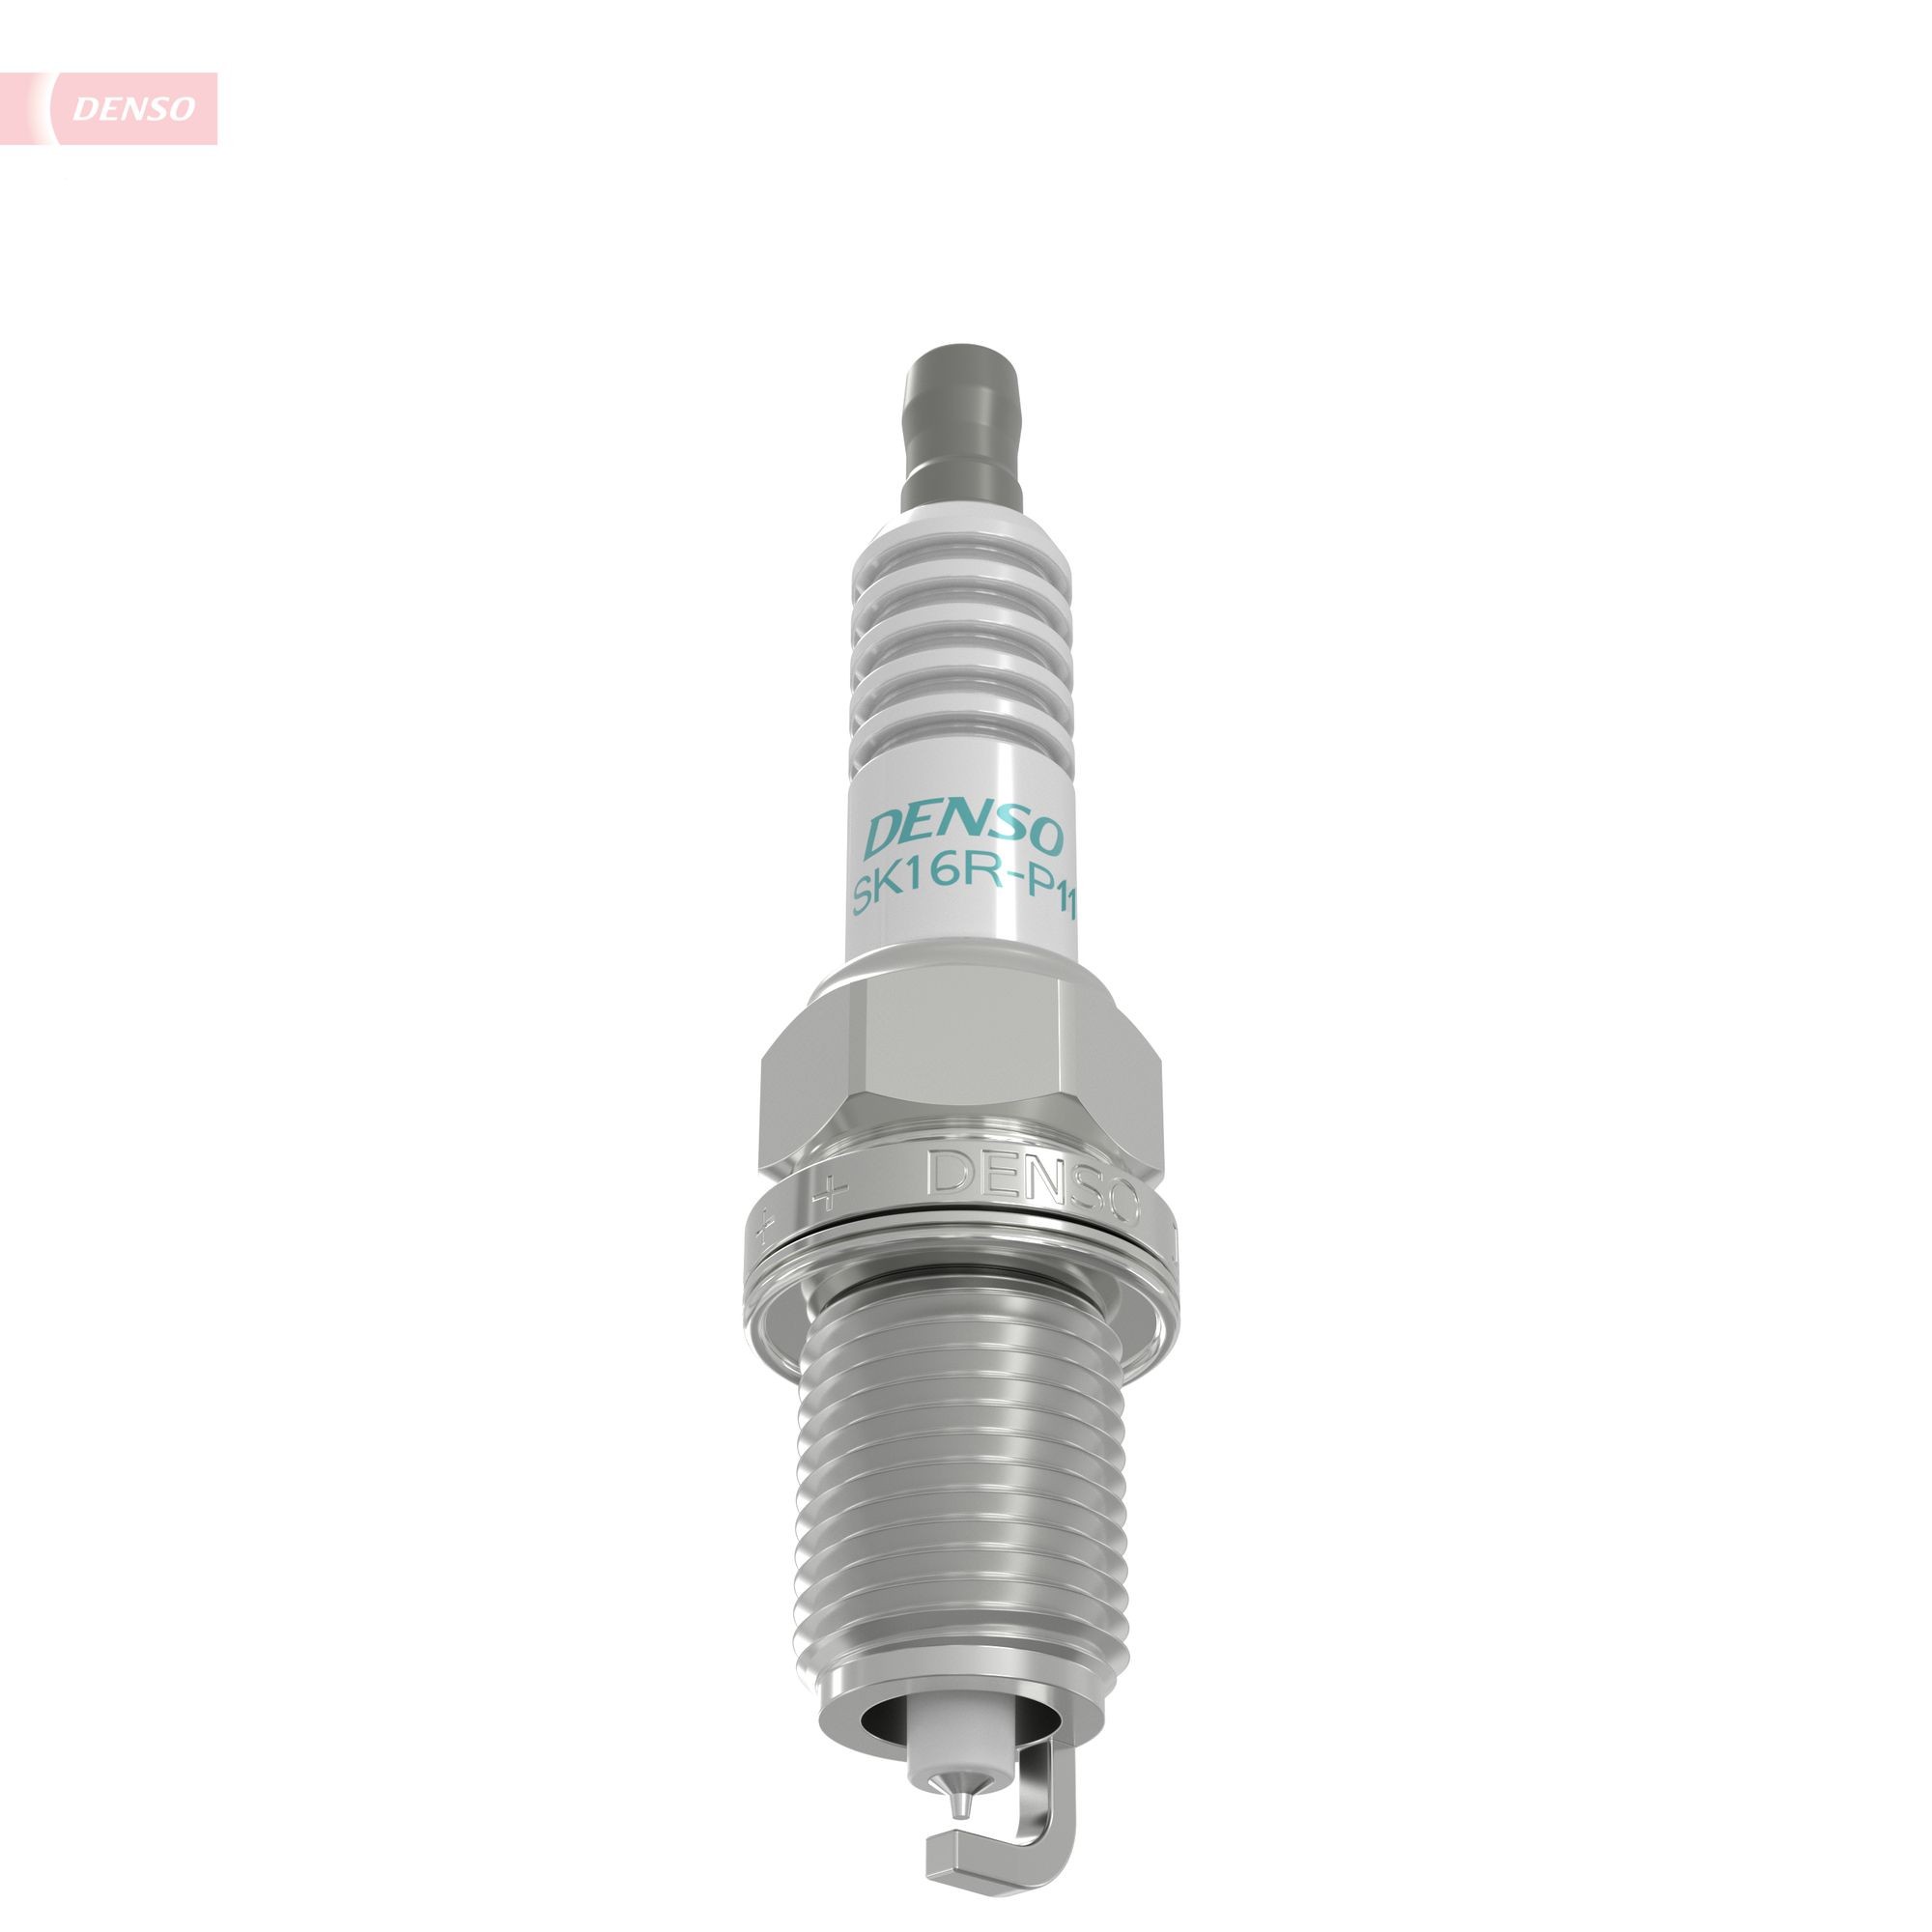 DENSO Spark plugs 3353 buy online